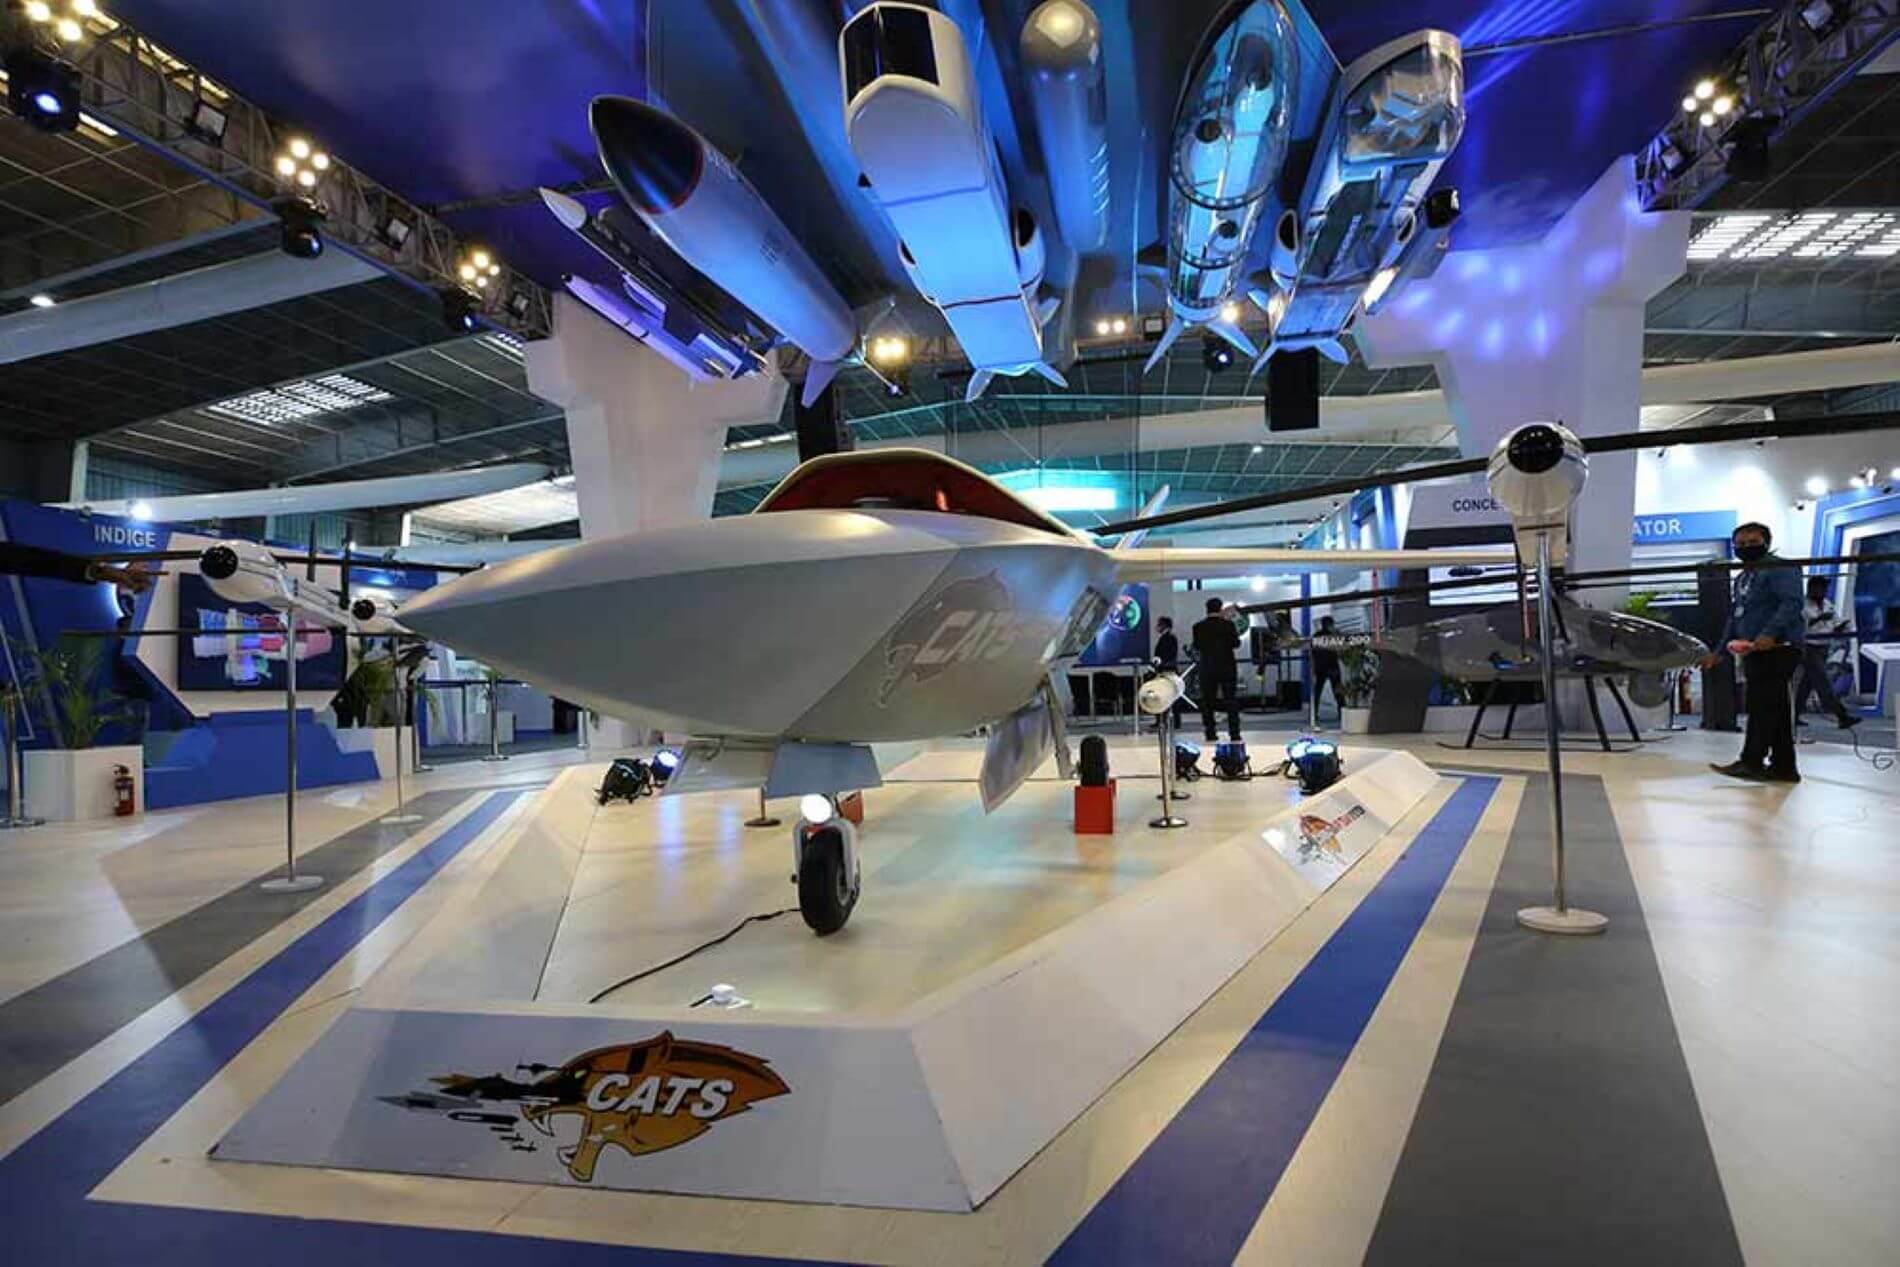 CATS Warrior 2: IAF's Future Unmanned Fighter-Bomber Aircraft